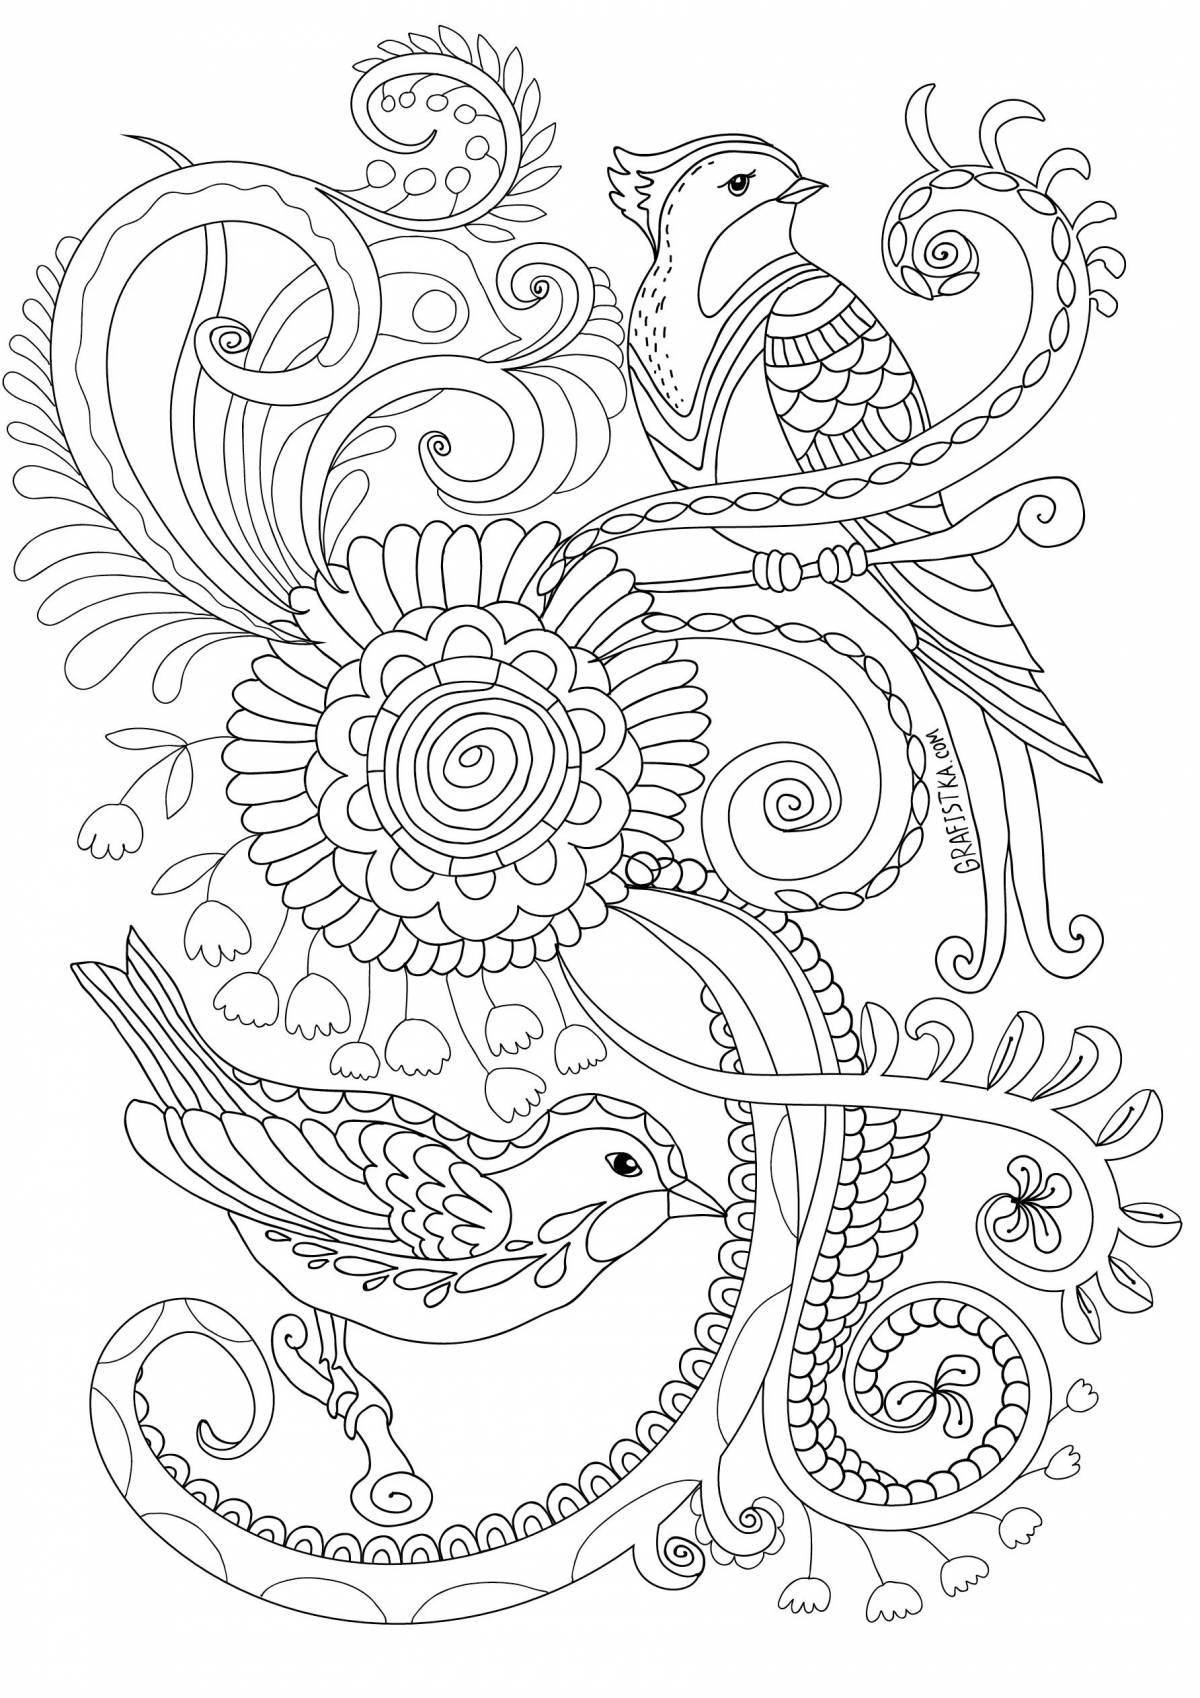 Shining patterns and ornaments for coloring pages for children